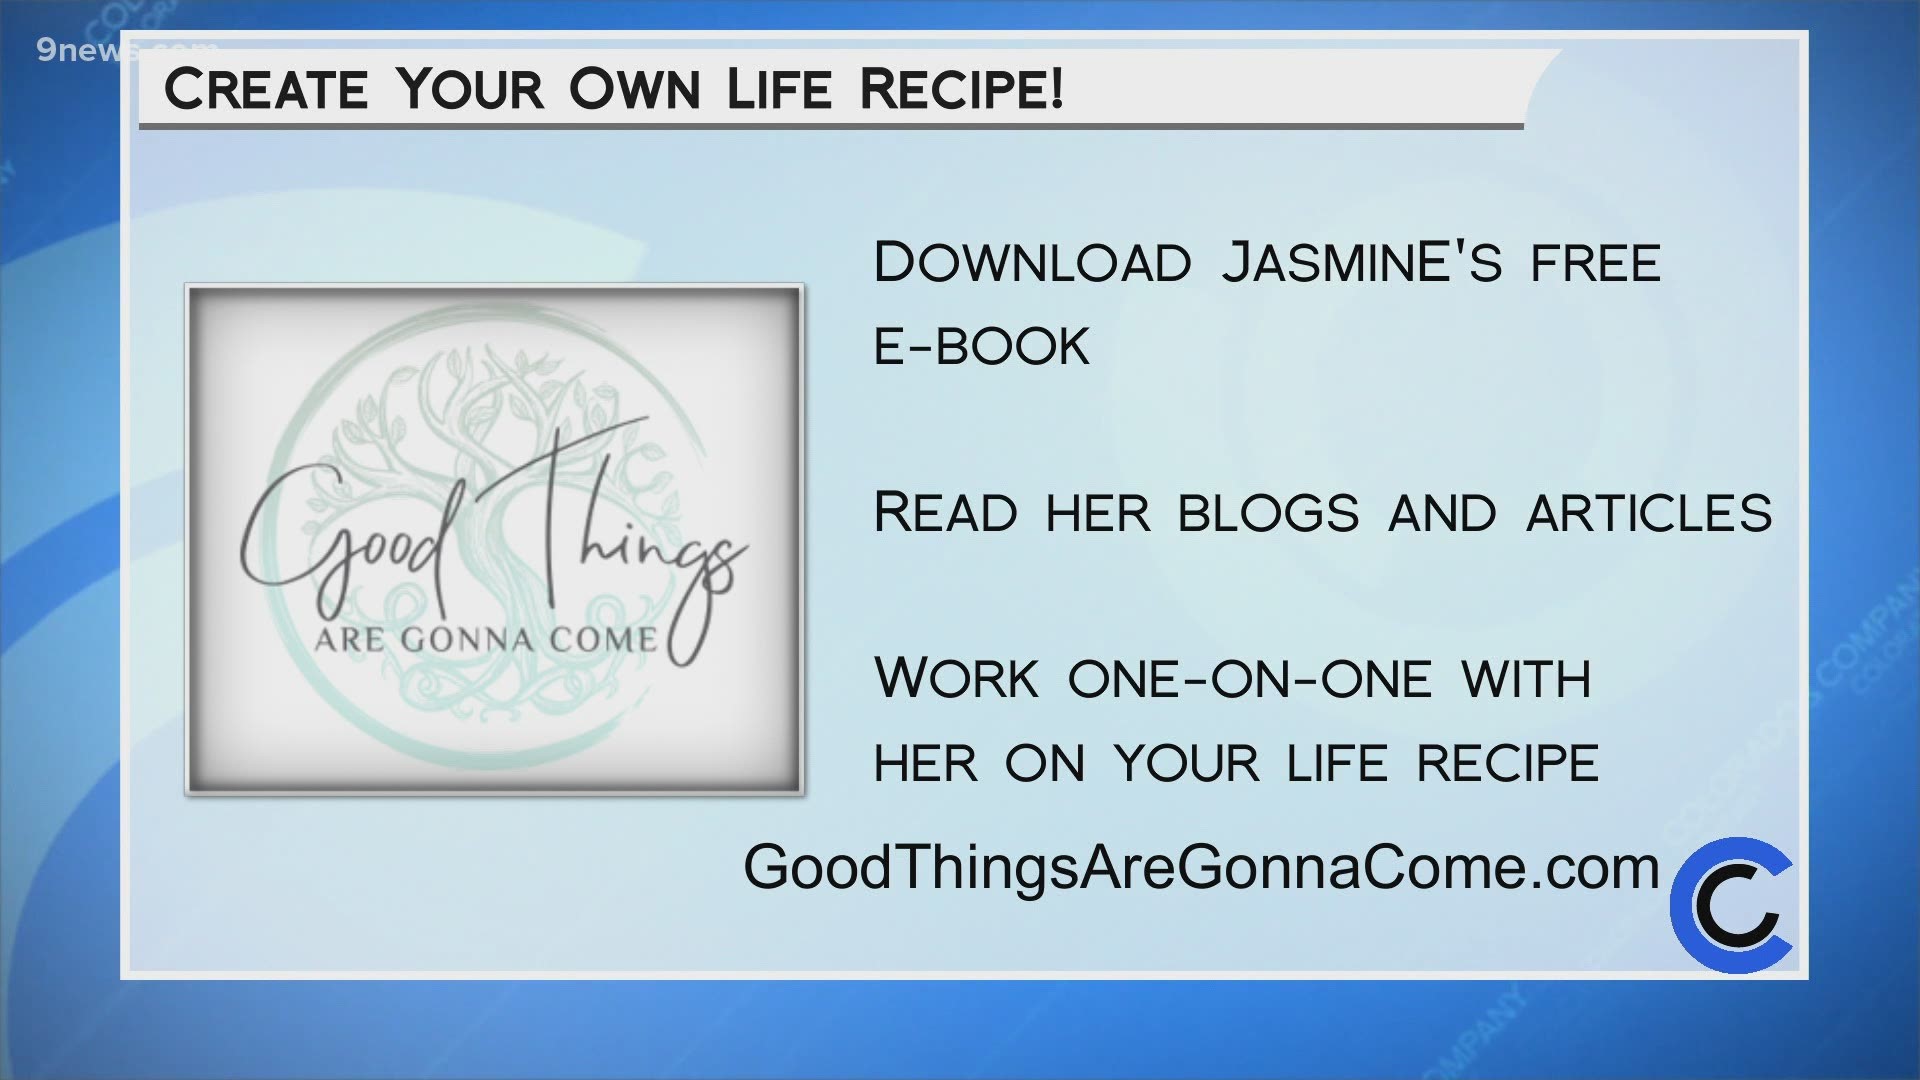 Learn more about Jasmine and "Good Things Are Gonna Come" at GoodThingsAreGonnaCome.com.